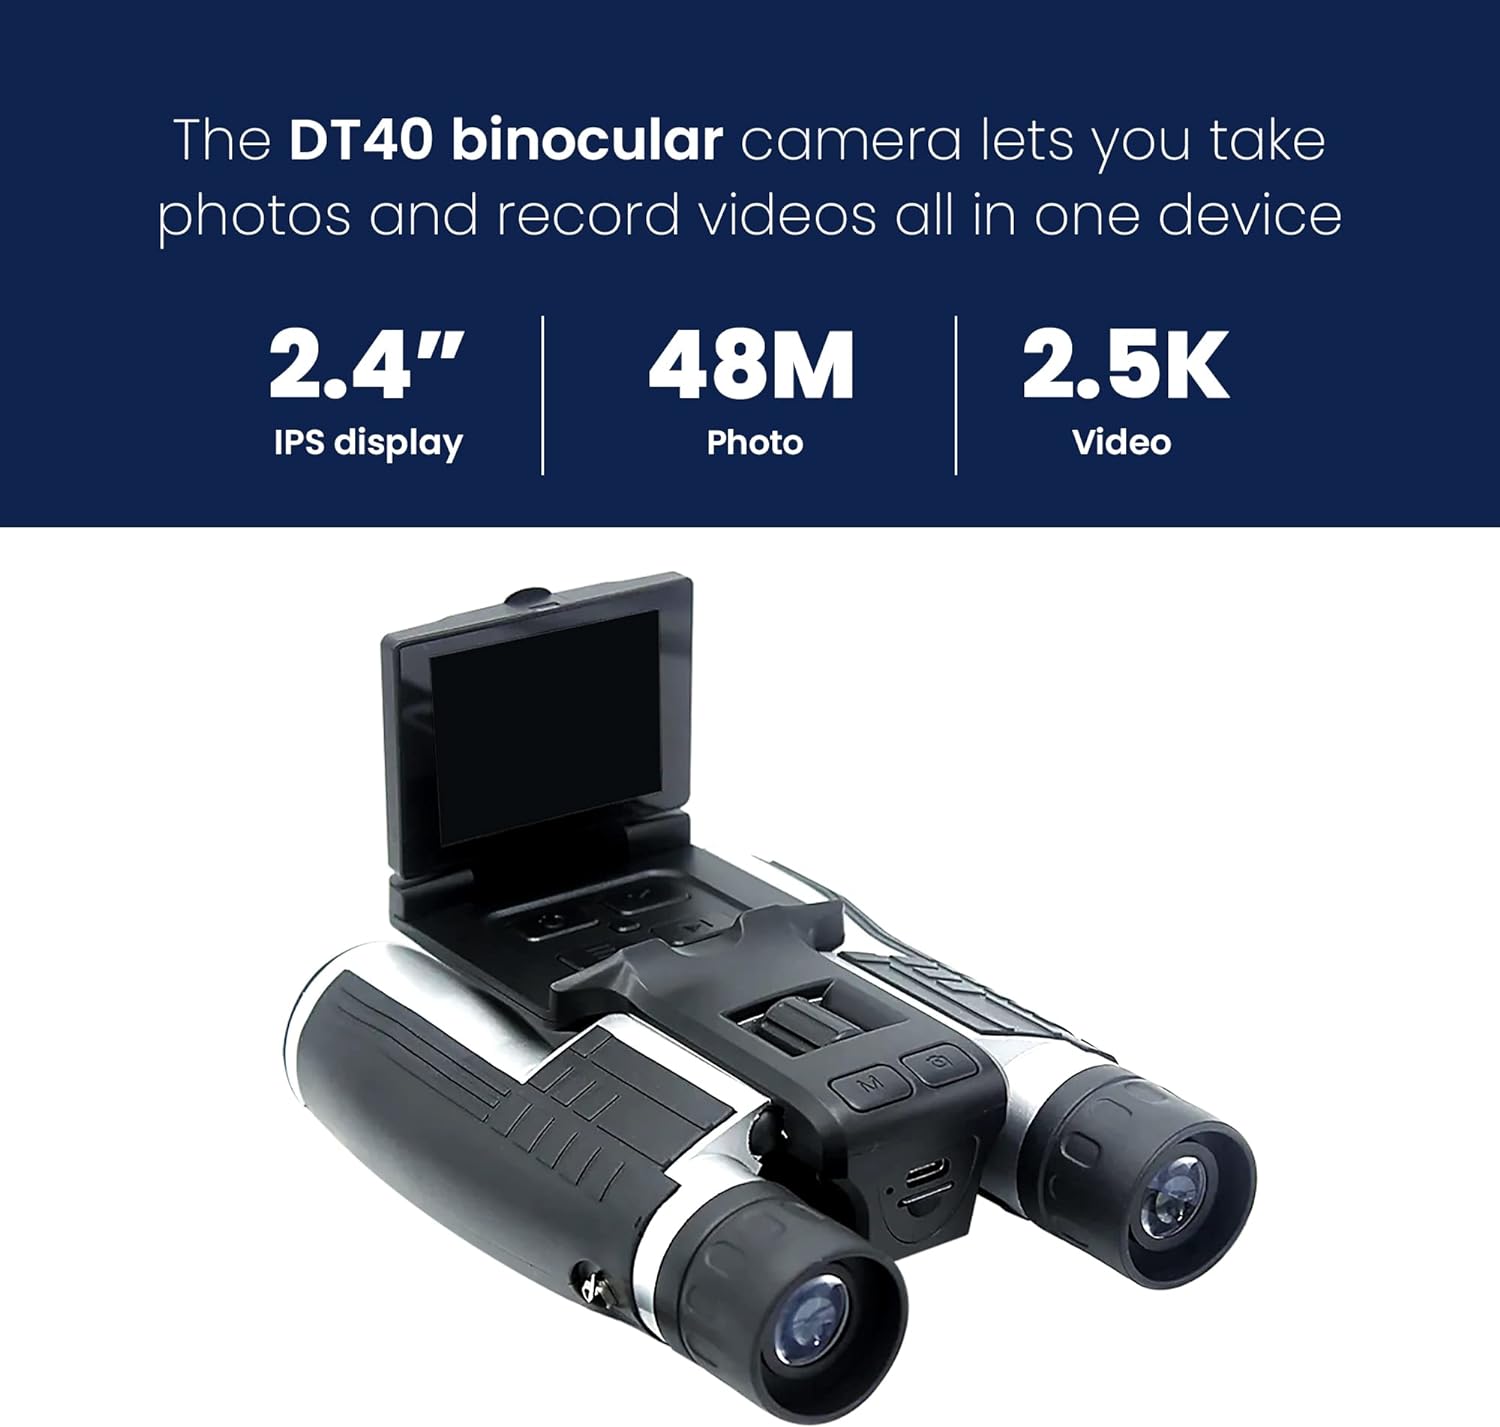 High Powered Binoculars 12 x 32 with Dual Digital Camera  Video Recording – Binocular Compact 5MP Camcorder for Bird Watching, Football, Concerts, and Hunting with 2.4” LCD Screen Night Vision Zoom